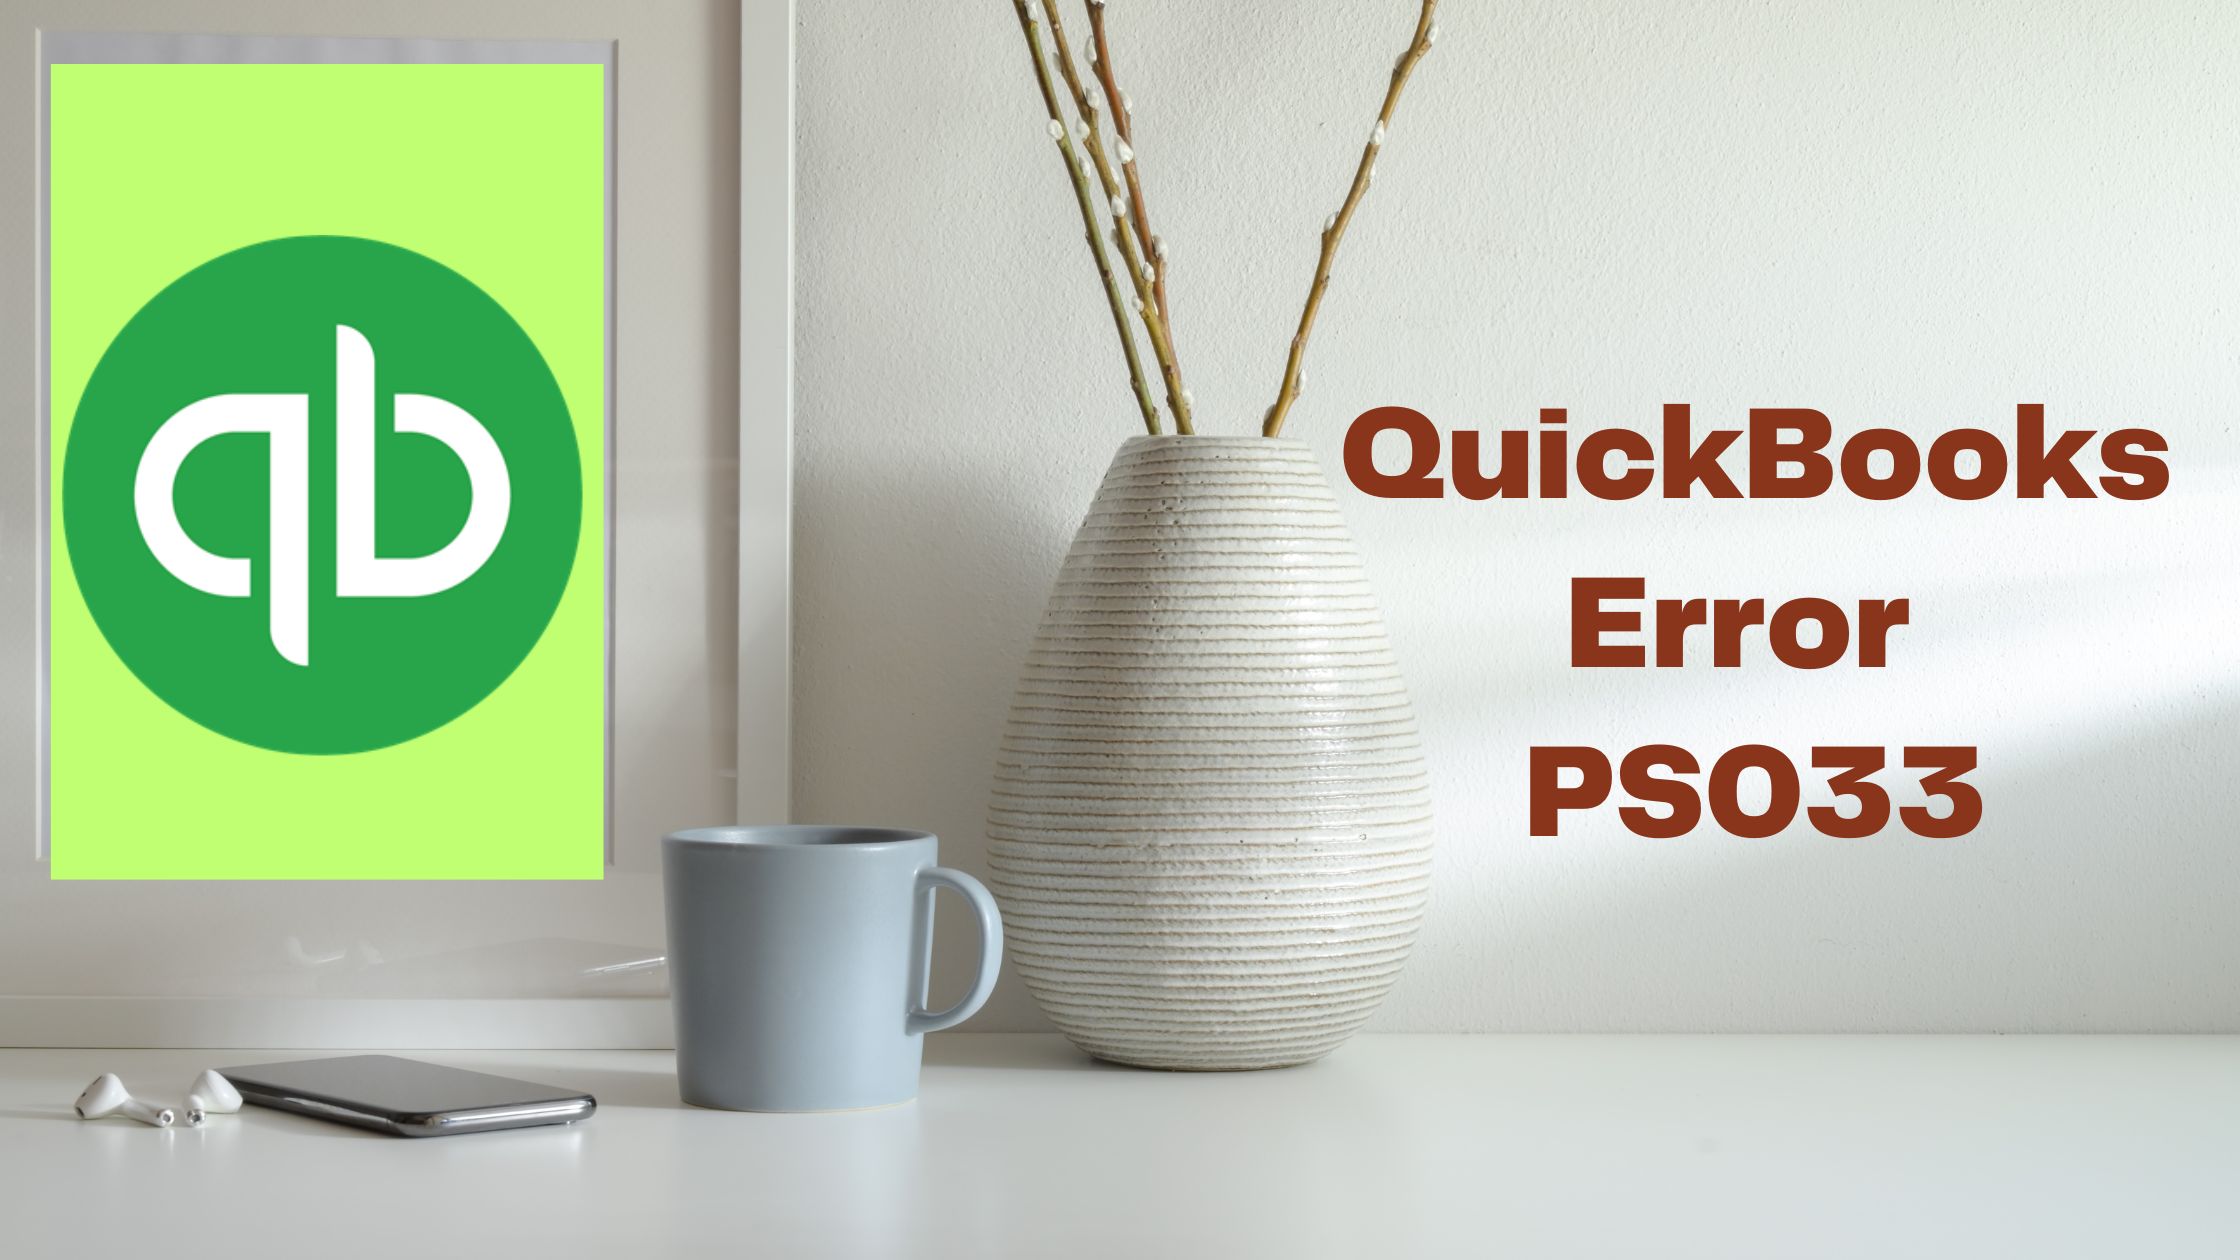 QuickBooks Error PS033: The Complete Guide to Fixing it